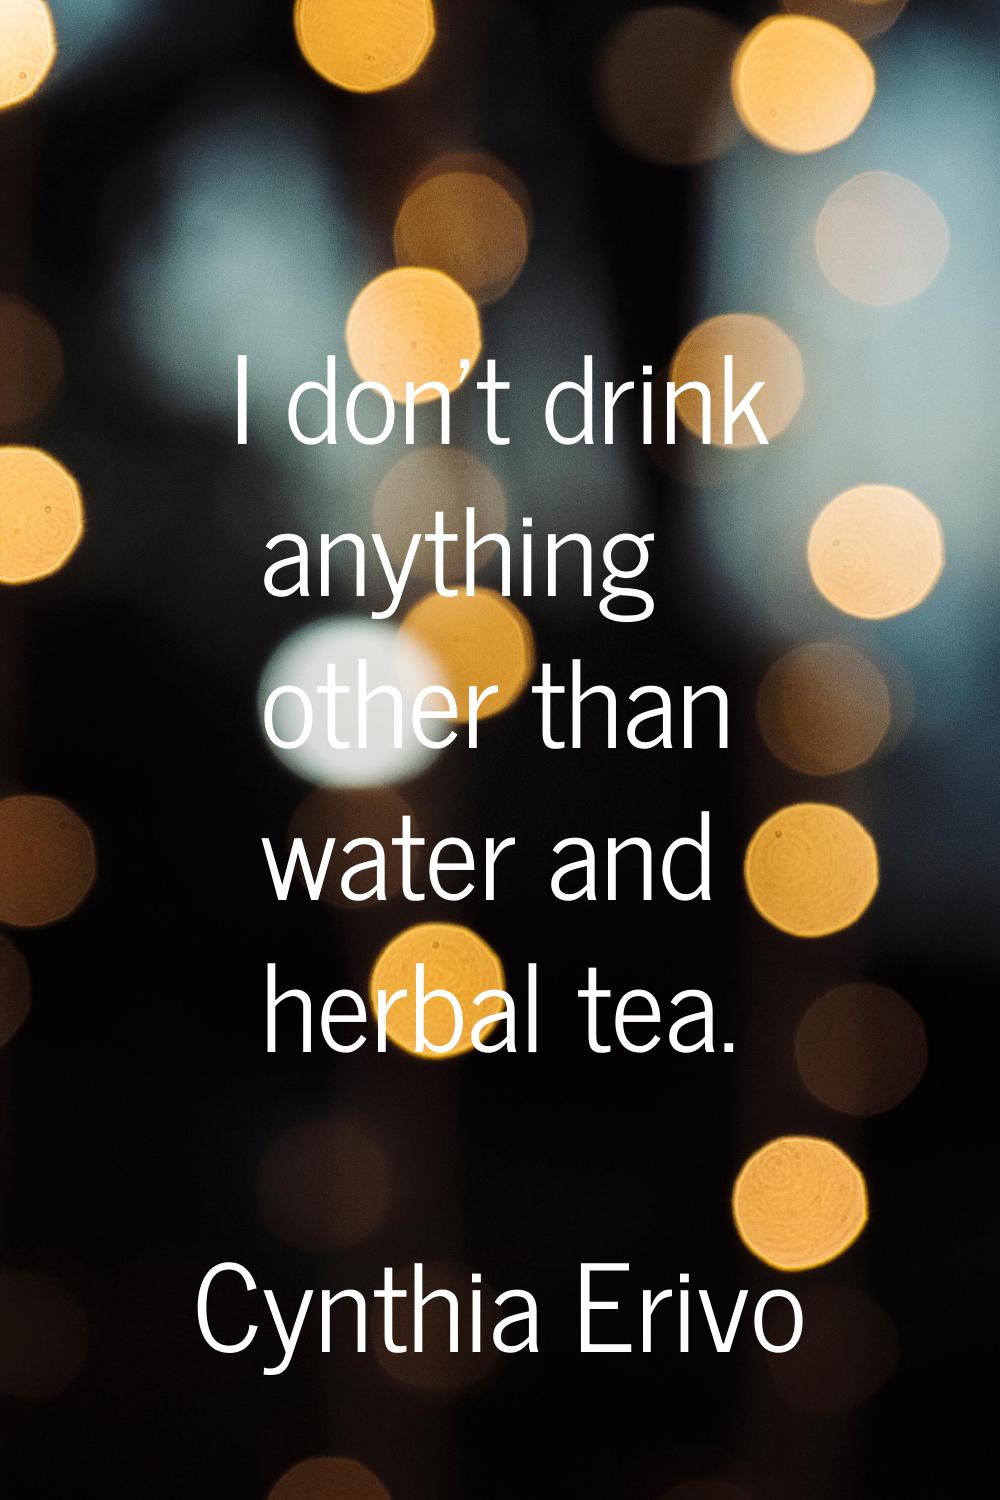 I don't drink anything other than water and herbal tea.